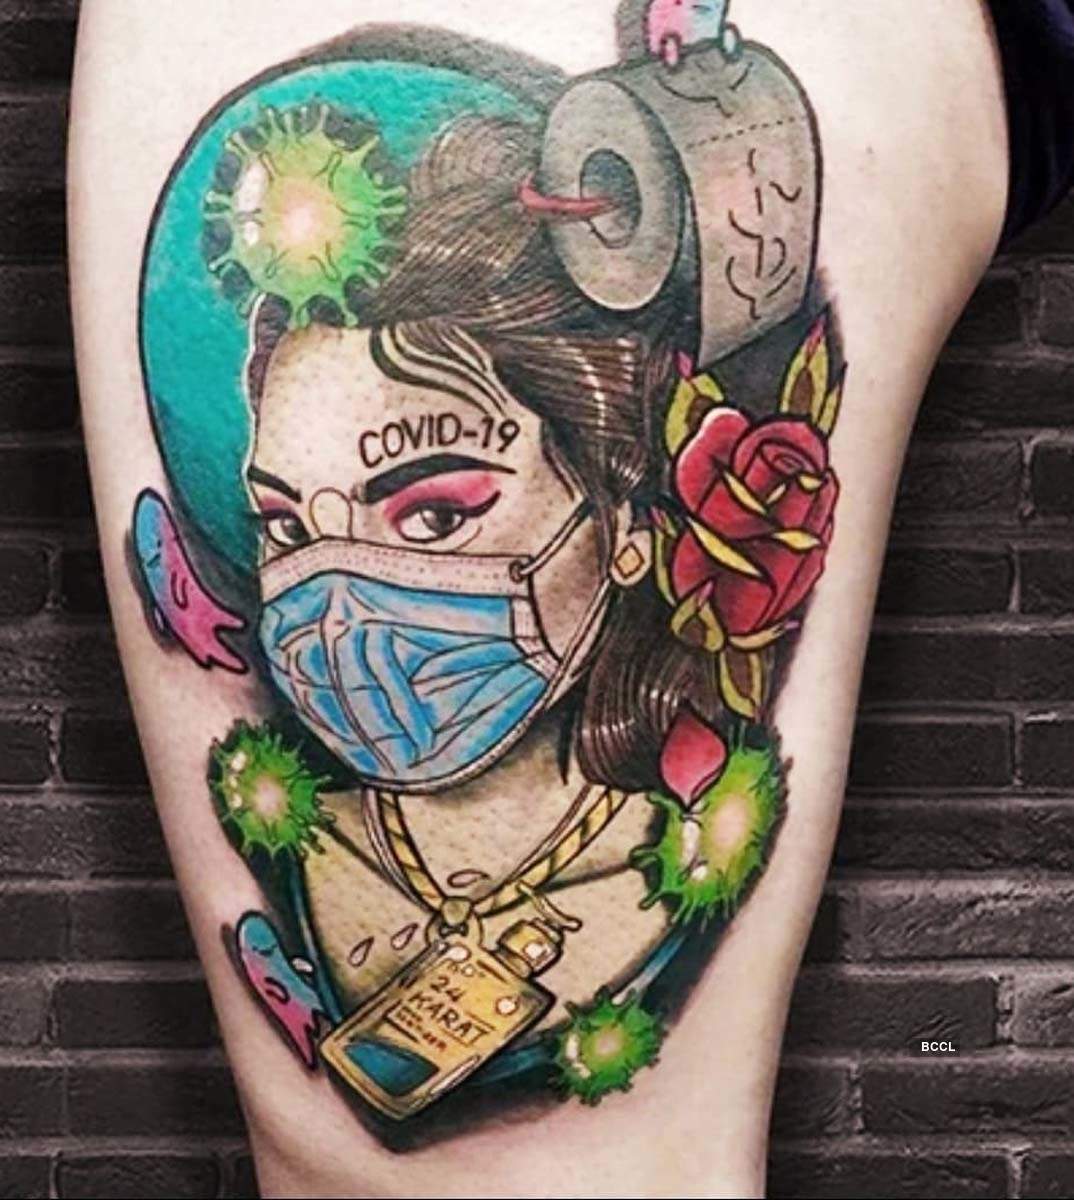 These fascinating tattoo designs inspired by Covid-19 will leave you baffled